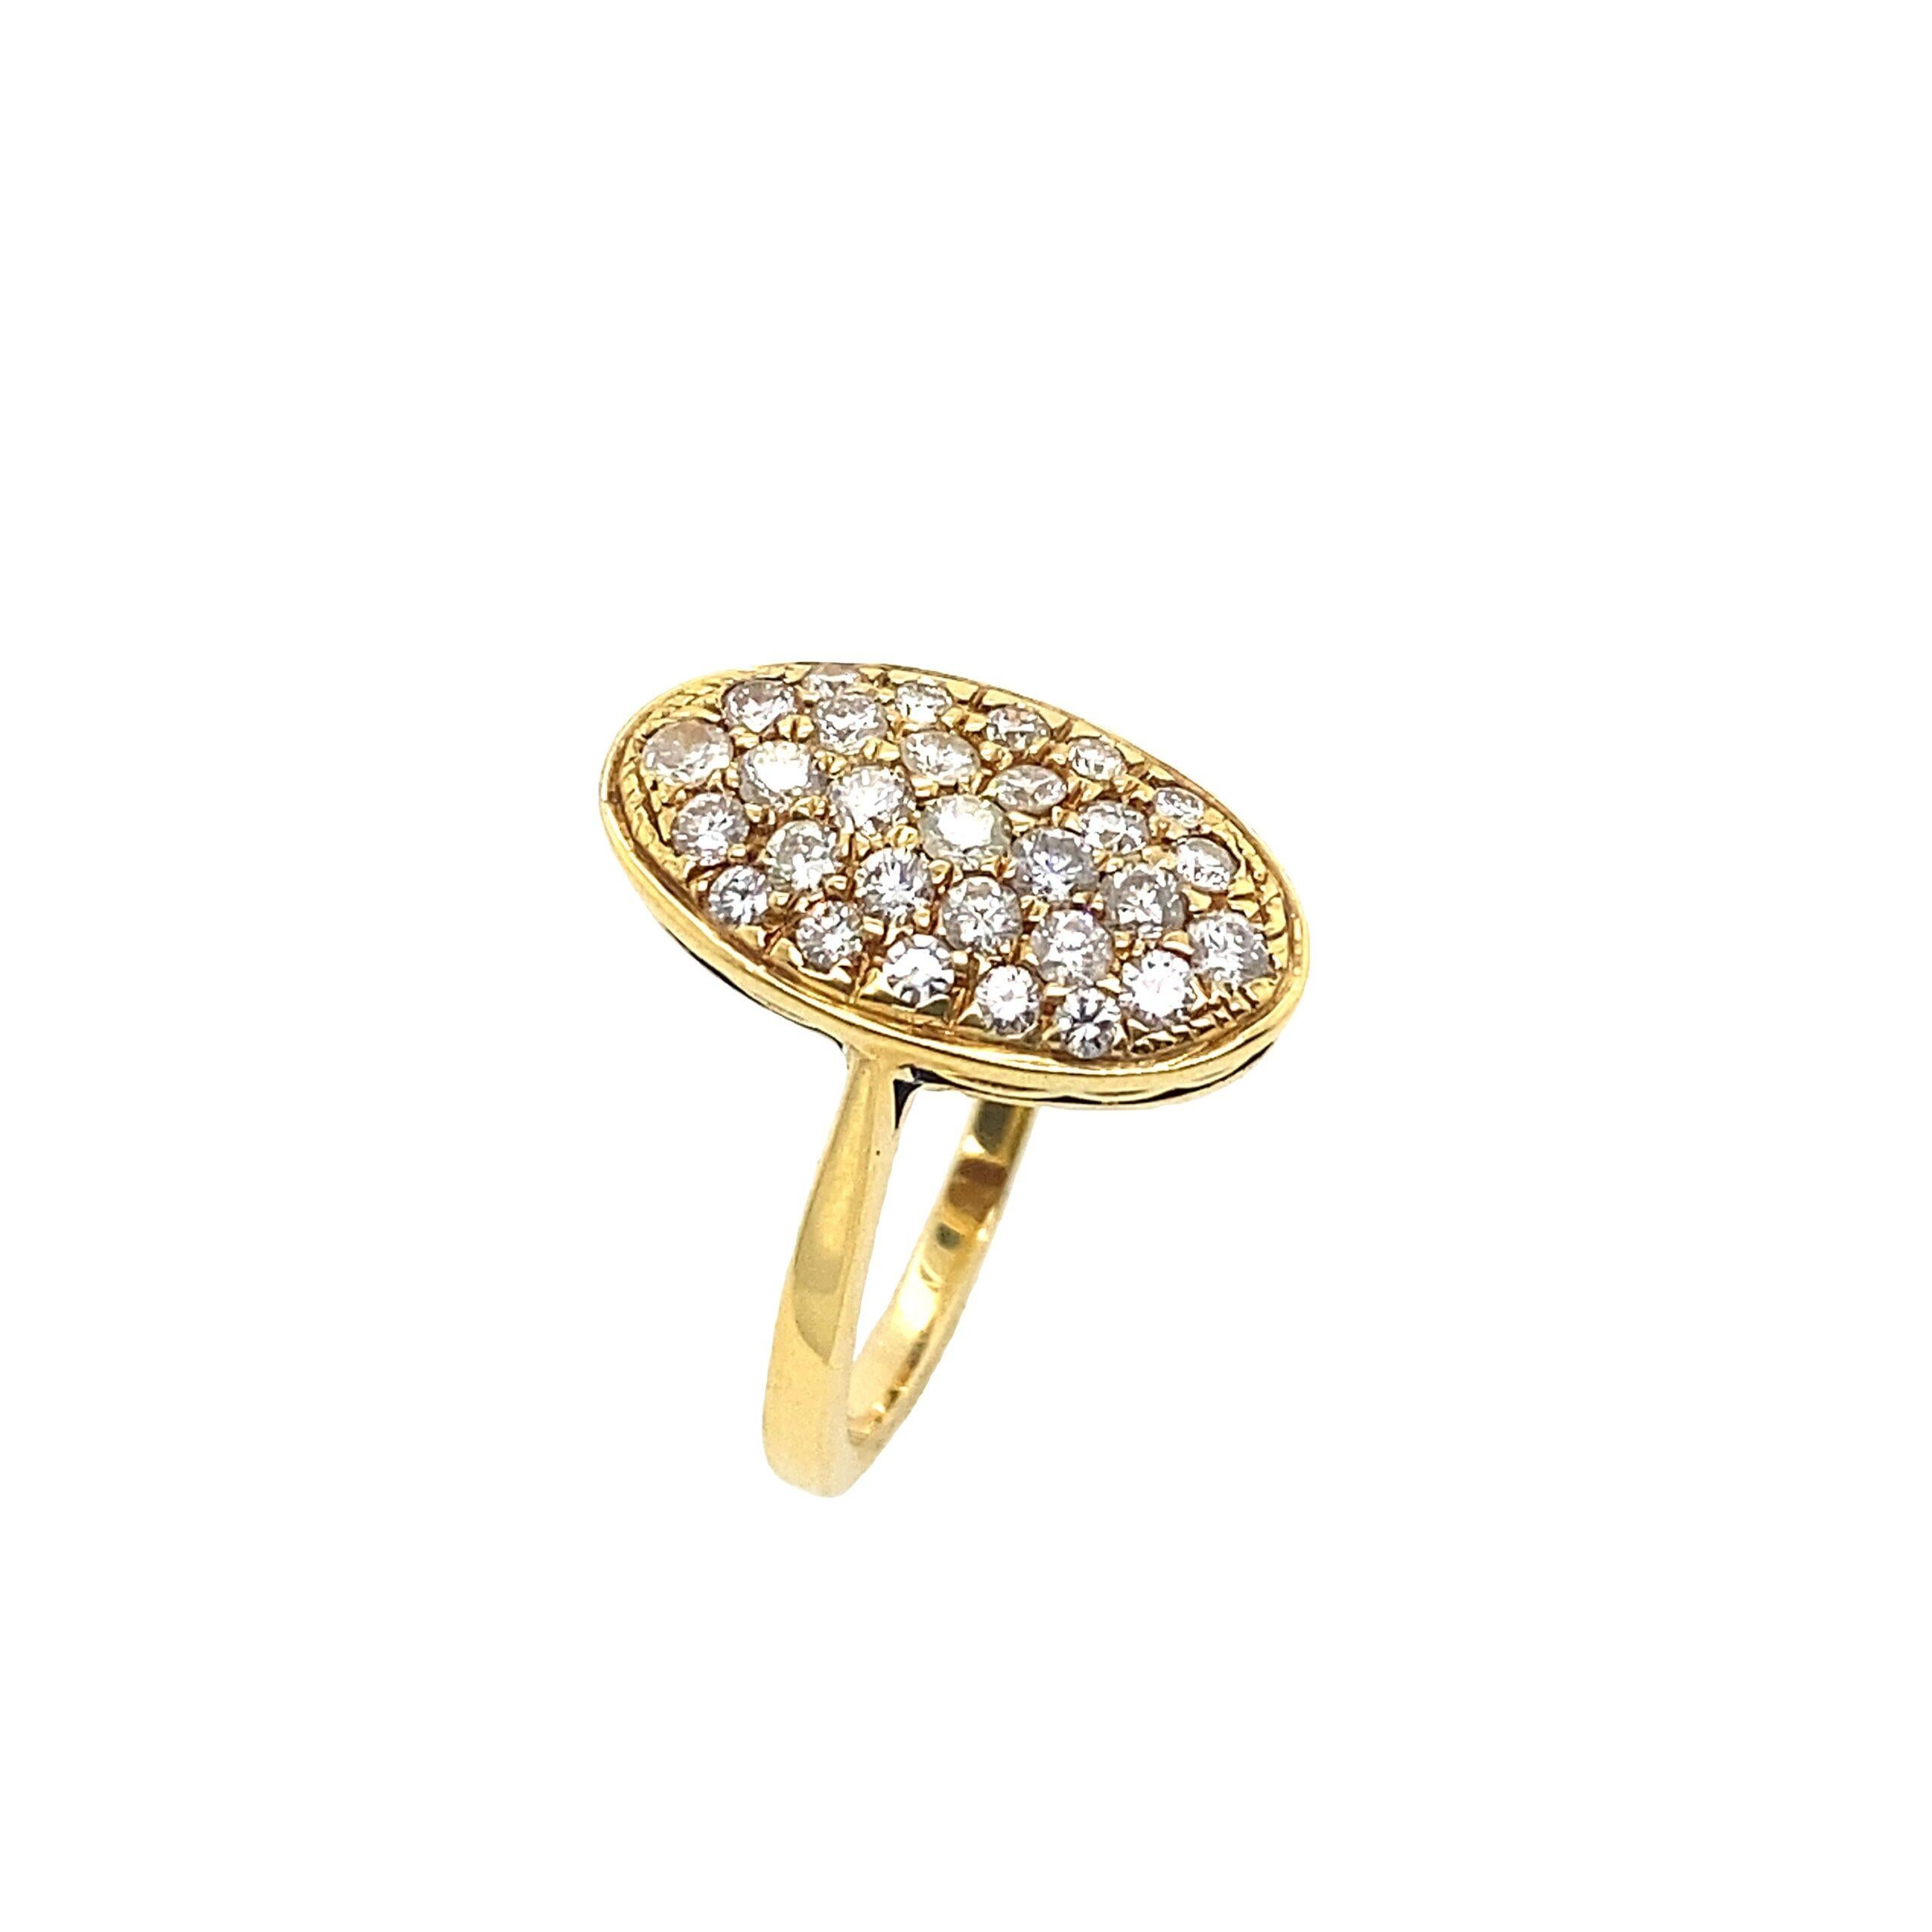 Large Oval Pavé 0.74ct Diamond Ring Set In 18ct Yellow Gold

Additional Information:
Total Diamond Weight: 0.74ct 
Diamond Colour: G/H
Diamond Clarity: Si
Total Weight: 6g
Ring Size: L
SMS3915 